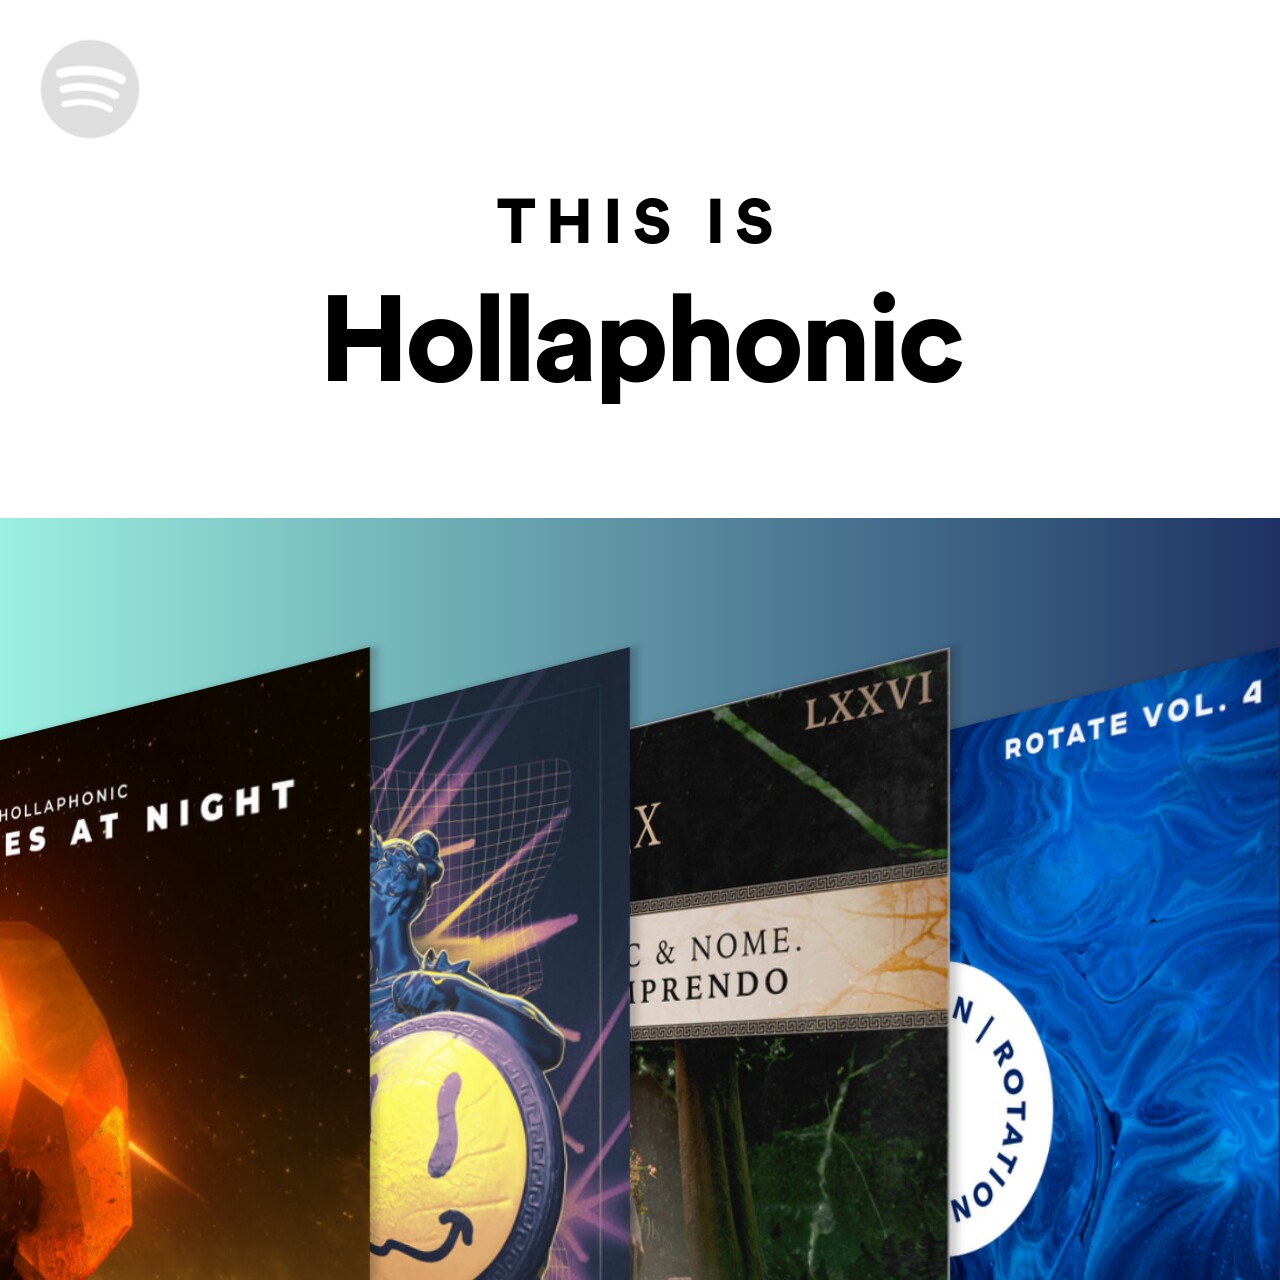 This Is Hollaphonic